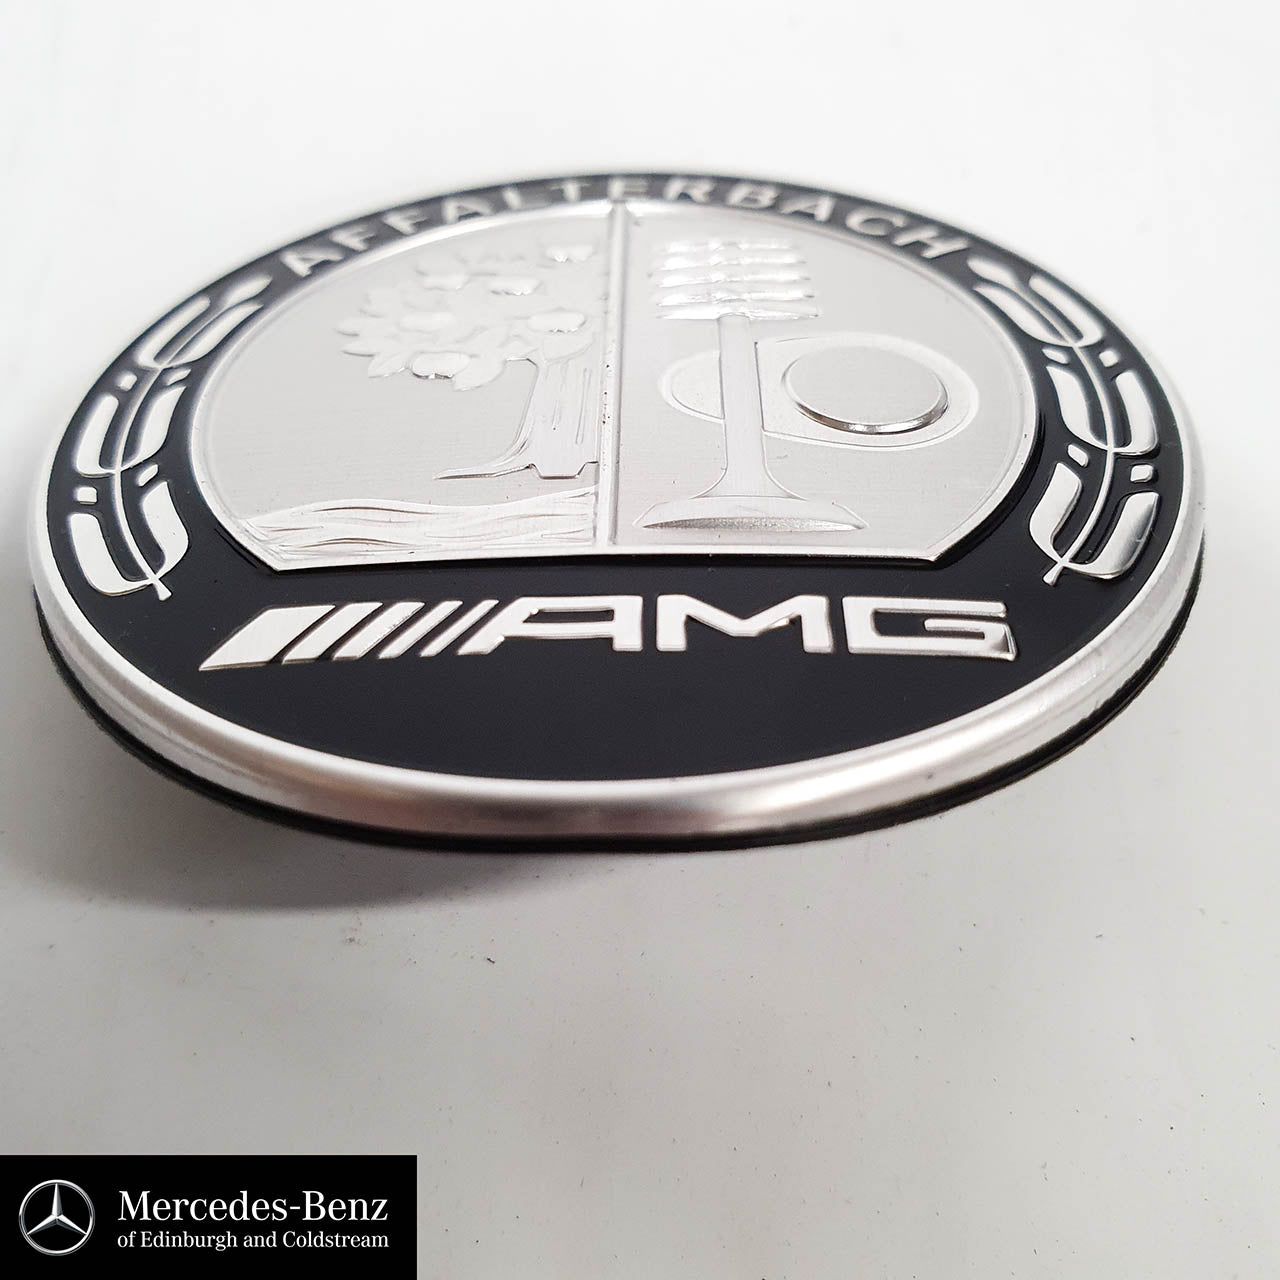 Mercedes Benz Chromium Grille With Benz Star And Amg Logo With Led  Headlight Of Black C Class C200 Coupe AMG Model In The Dark Garage During  Maintainance Checking Service Stock Photo, Picture